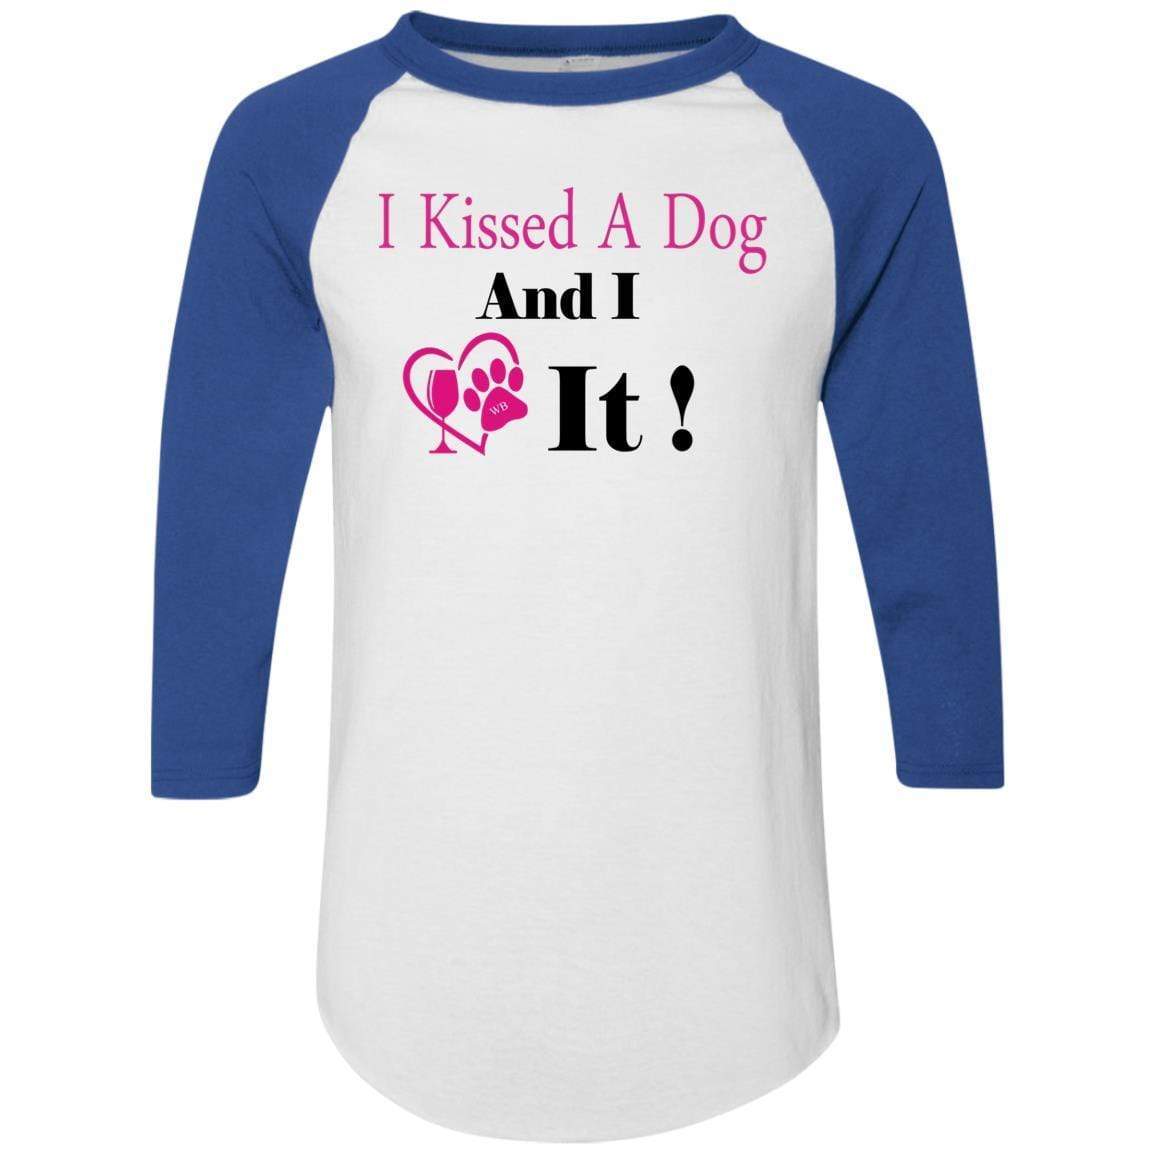 T-Shirts White/Royal / S WineyBitches.co "I Kissed A Dog And I Loved It:" Colorblock Raglan Jersey WineyBitchesCo